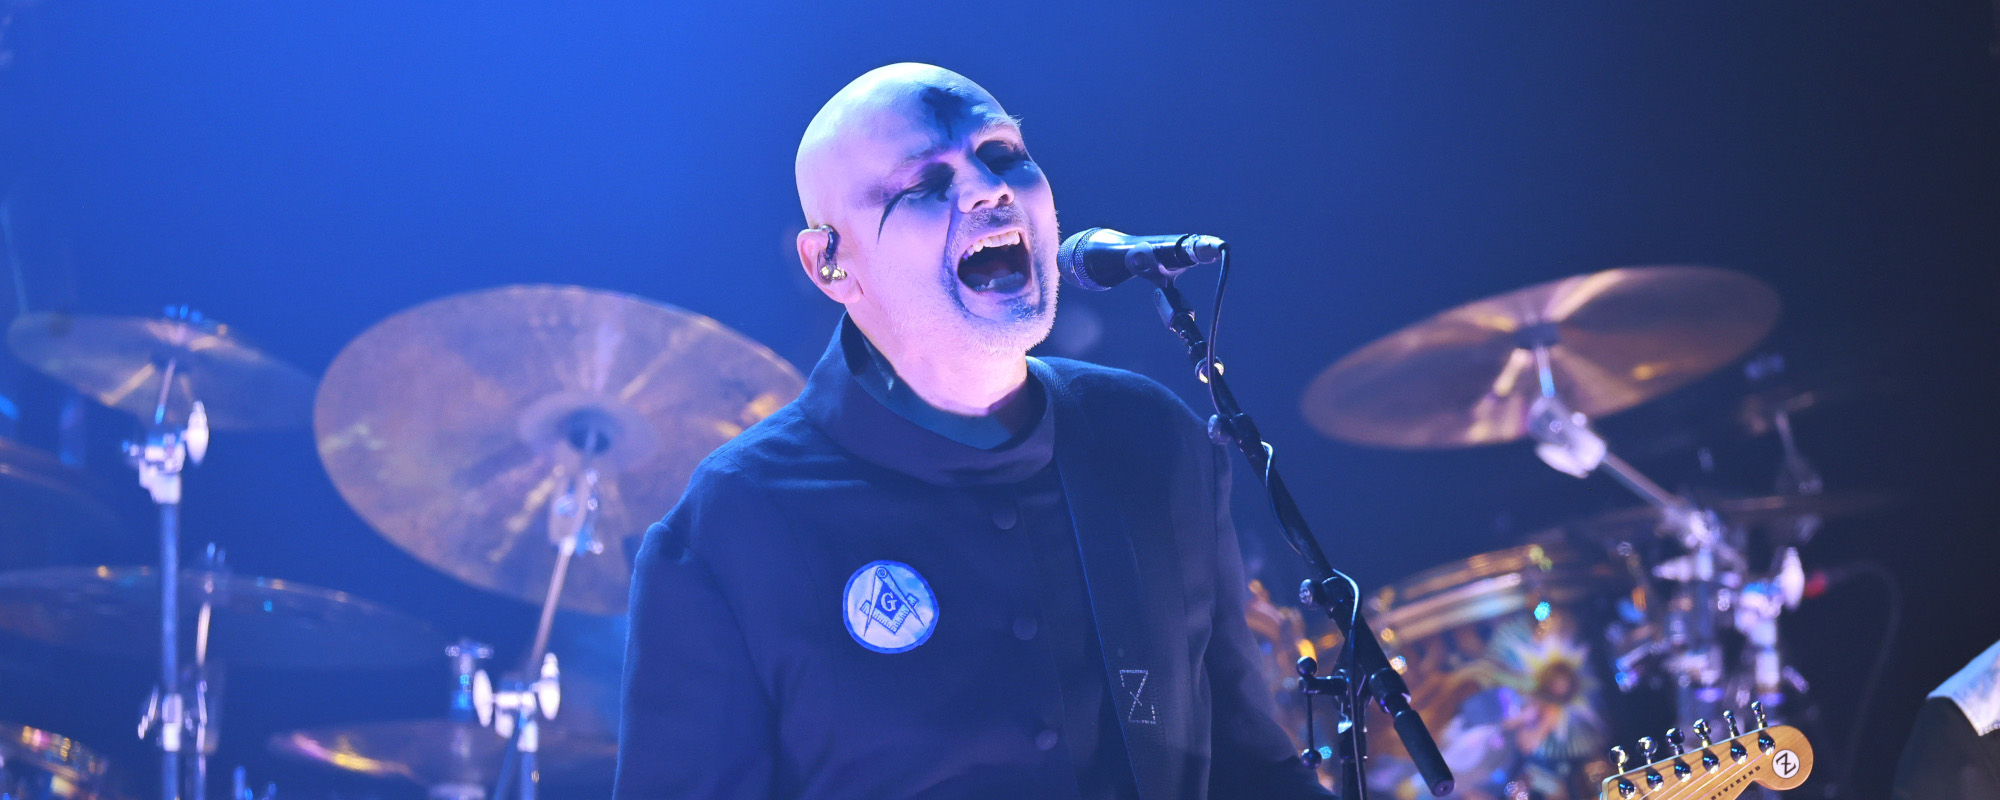 The Meaning Behind the Song “1979” by Smashing Pumpkins